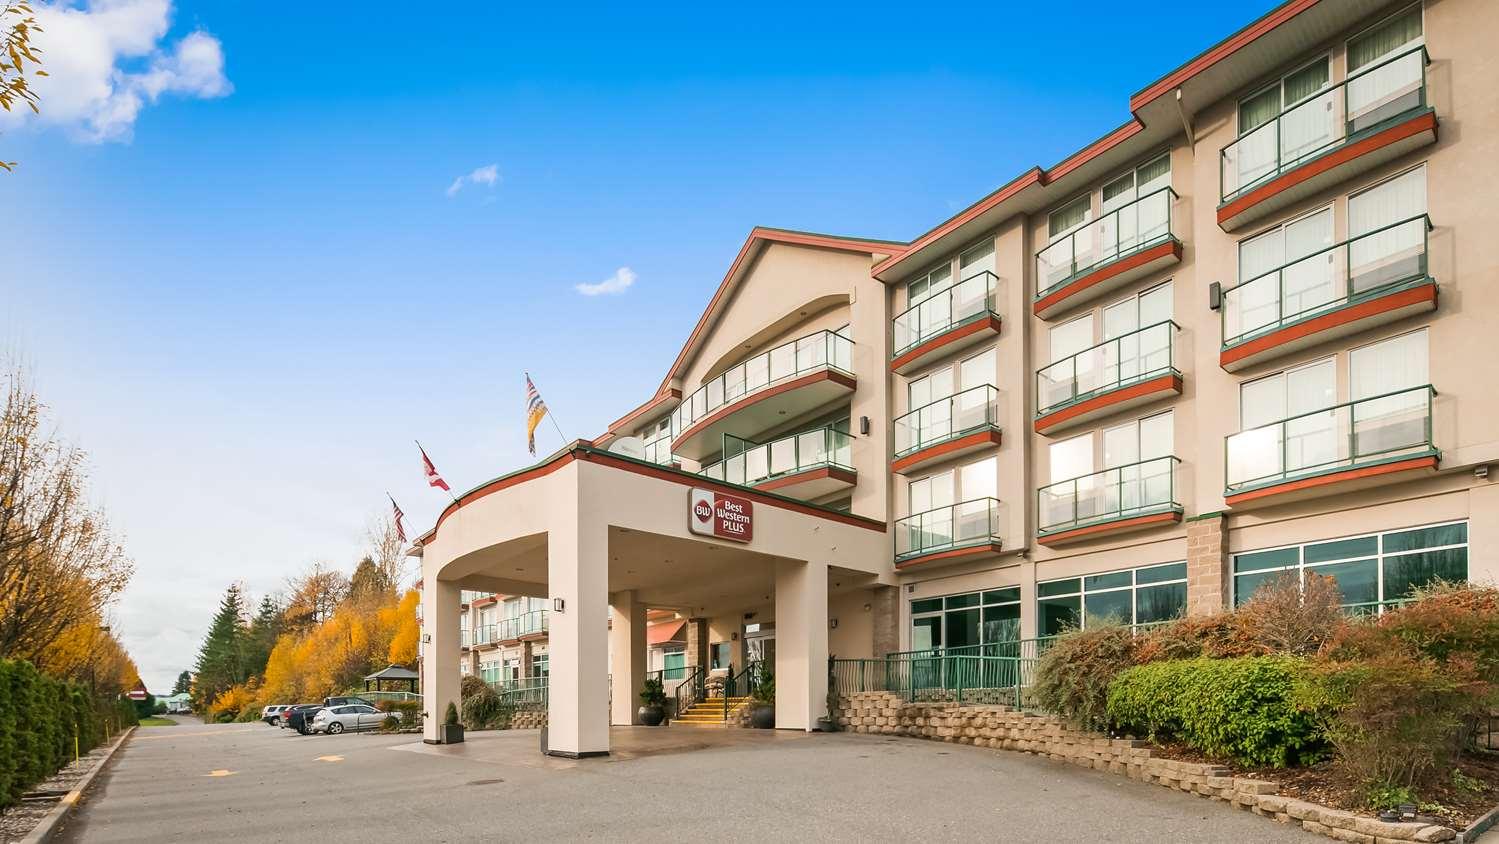 Best Western Plus Mission City Lodge in Abbotsford, BC